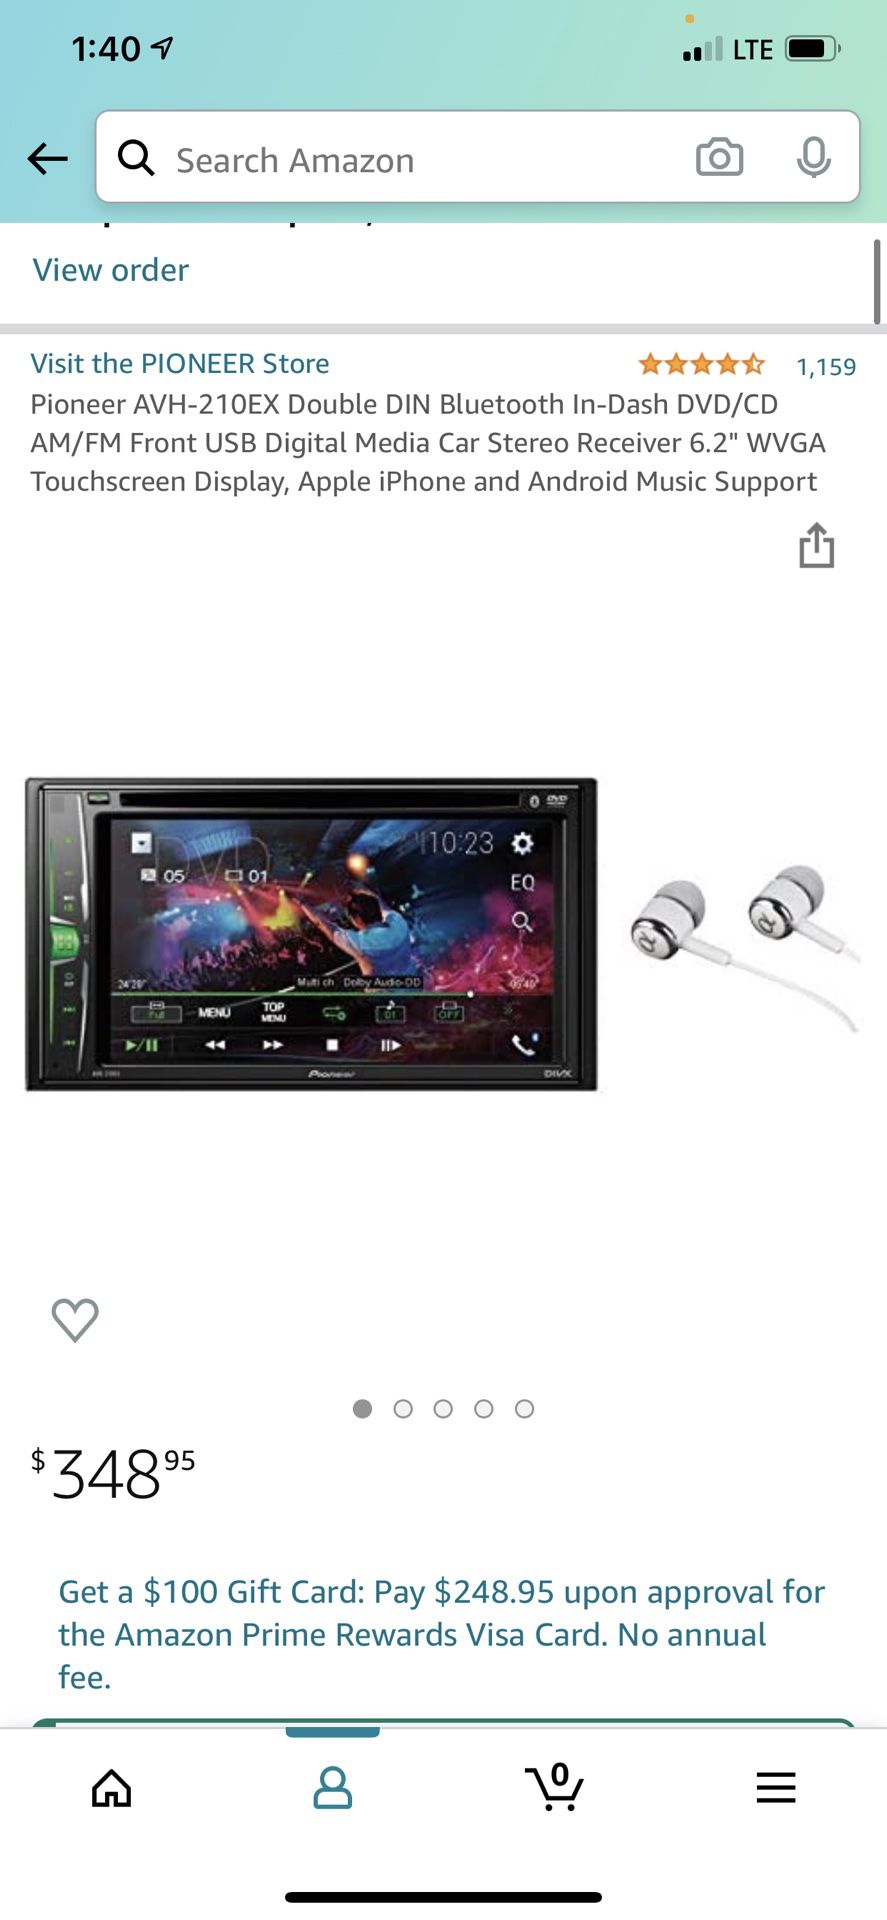 Pioneer AVH-210EX Double DIN Bluetooth In-Dash DVD/CD AM/FM Front USB Digital Media Car Stereo Receiver 6.2" WVGA Touchscreen Display, Apple iPhone an